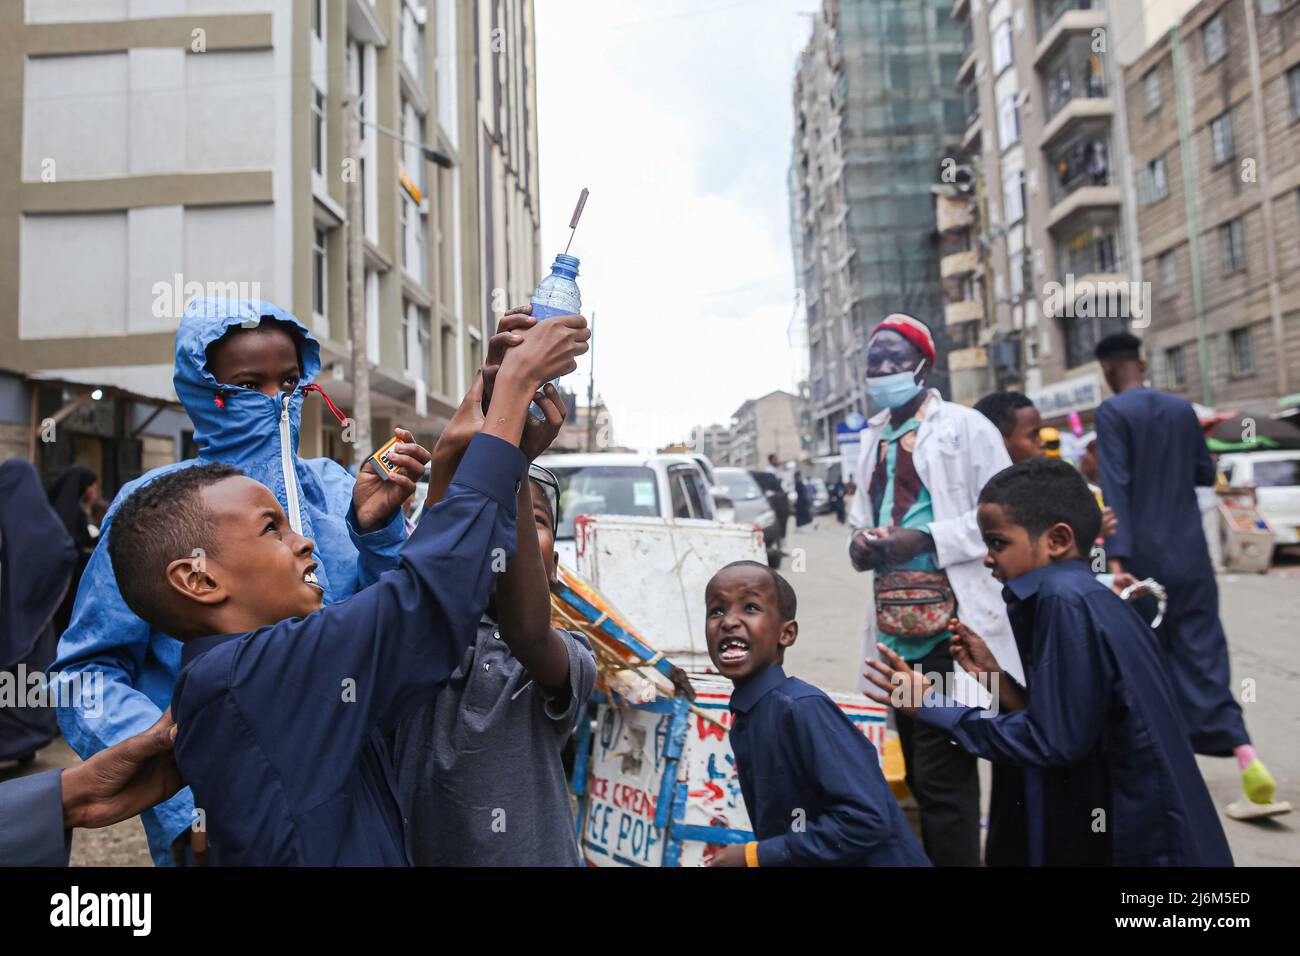 A Kenyan Somali boy points up fireworks after lighting at Jackson Muriethi street in Eastleigh, on Eid-Ul-Fitr. Muslims in Kenya celebrate Eid-Ul-Fitr which marks the end of the Holy month of Ramadhan. Stock Photo